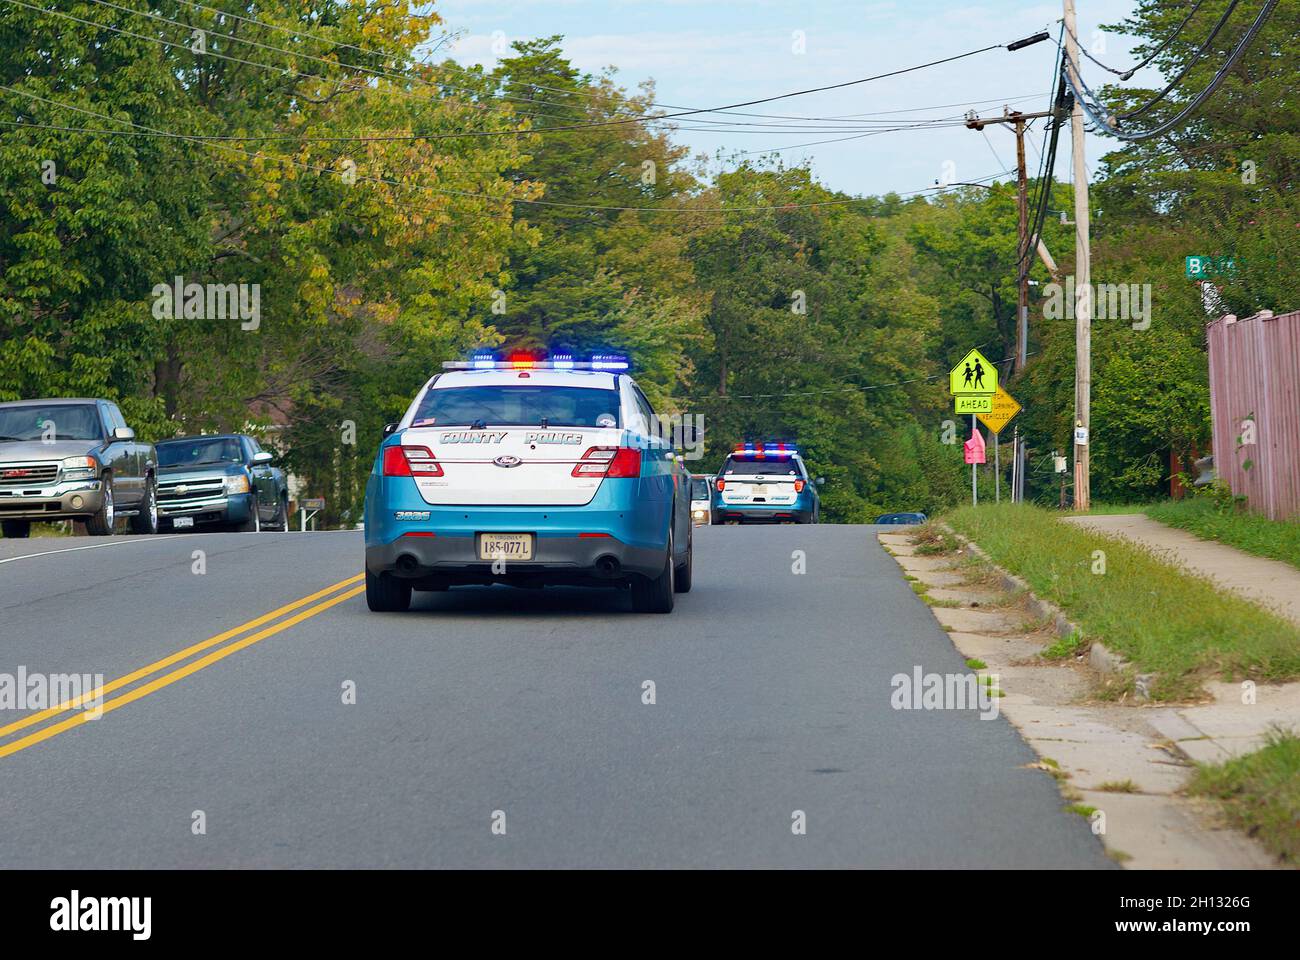 Woodbridge, Virginia, USA - October 15, 2021: Two Prince William County police cruisers speed through a neighborhood responding to a call for help. Stock Photo